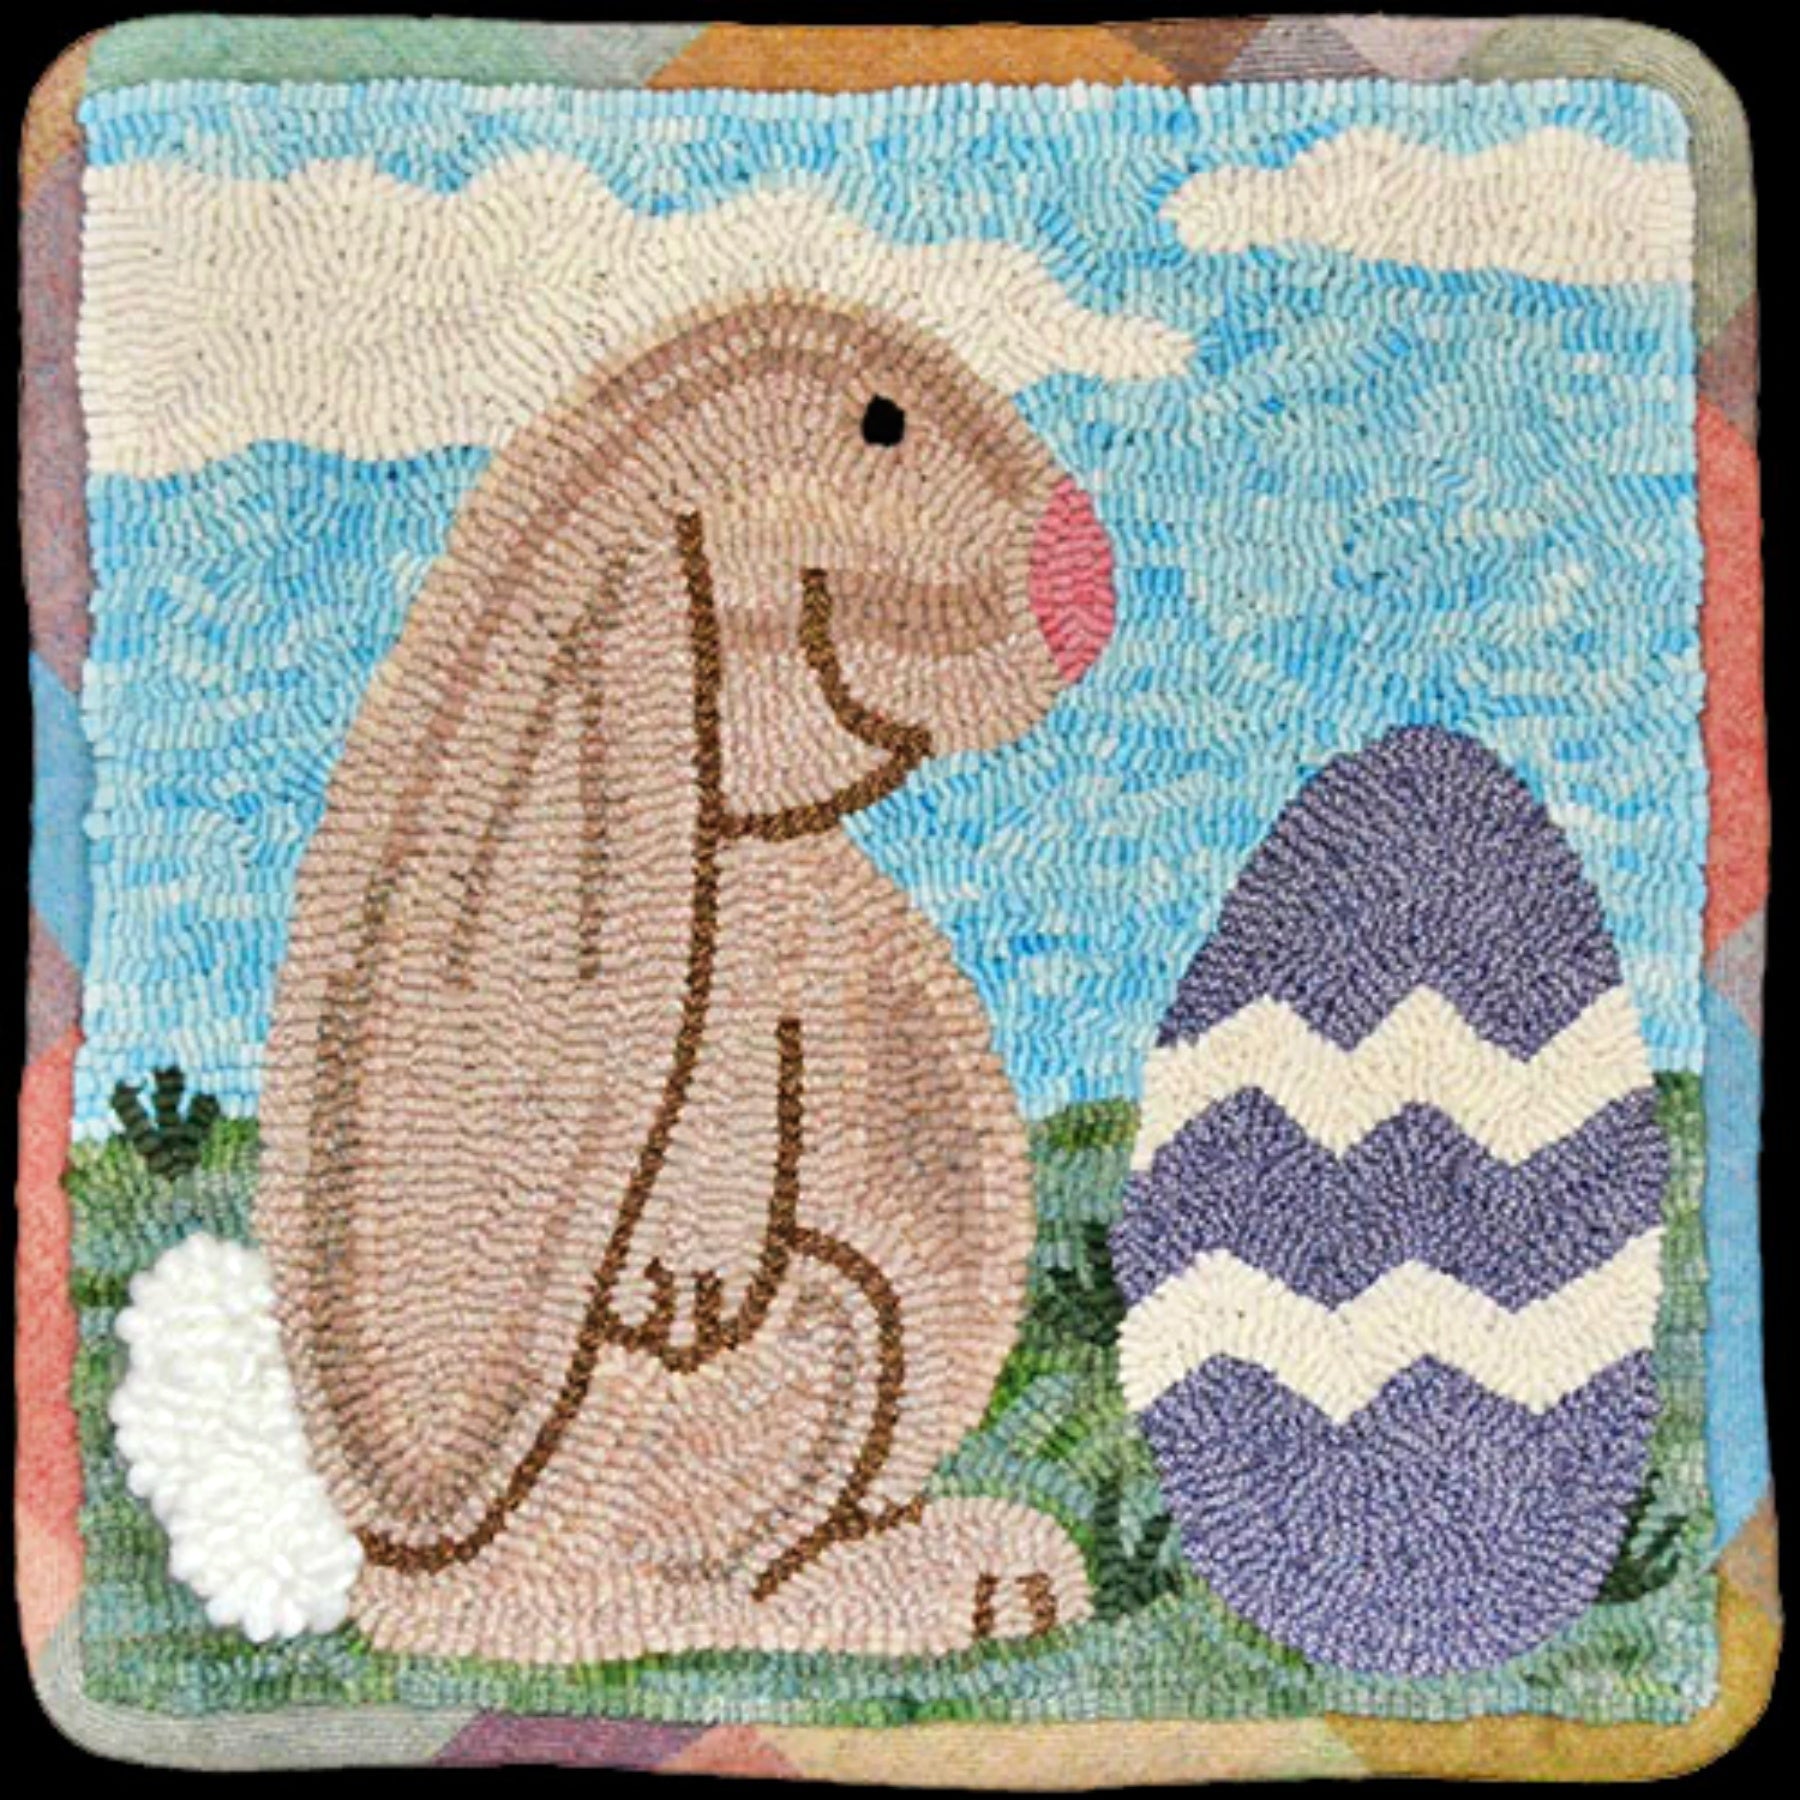 Leroy the Lop-Eared Bunny, rug hooked by Christa Bowling